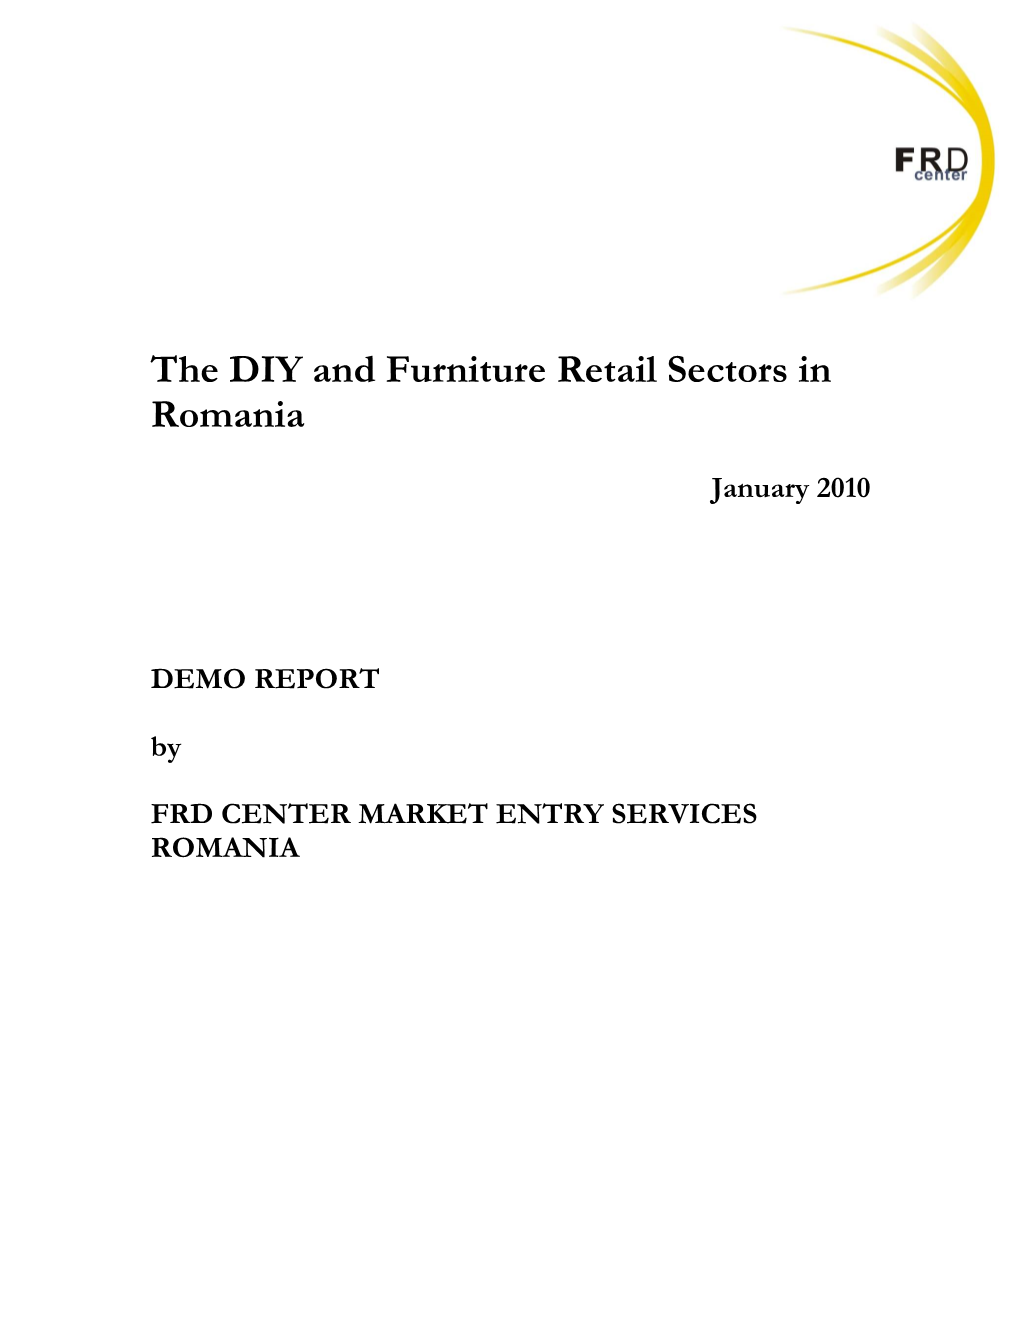 FRD Center Report the DIY and Furniture Sectors in Romania